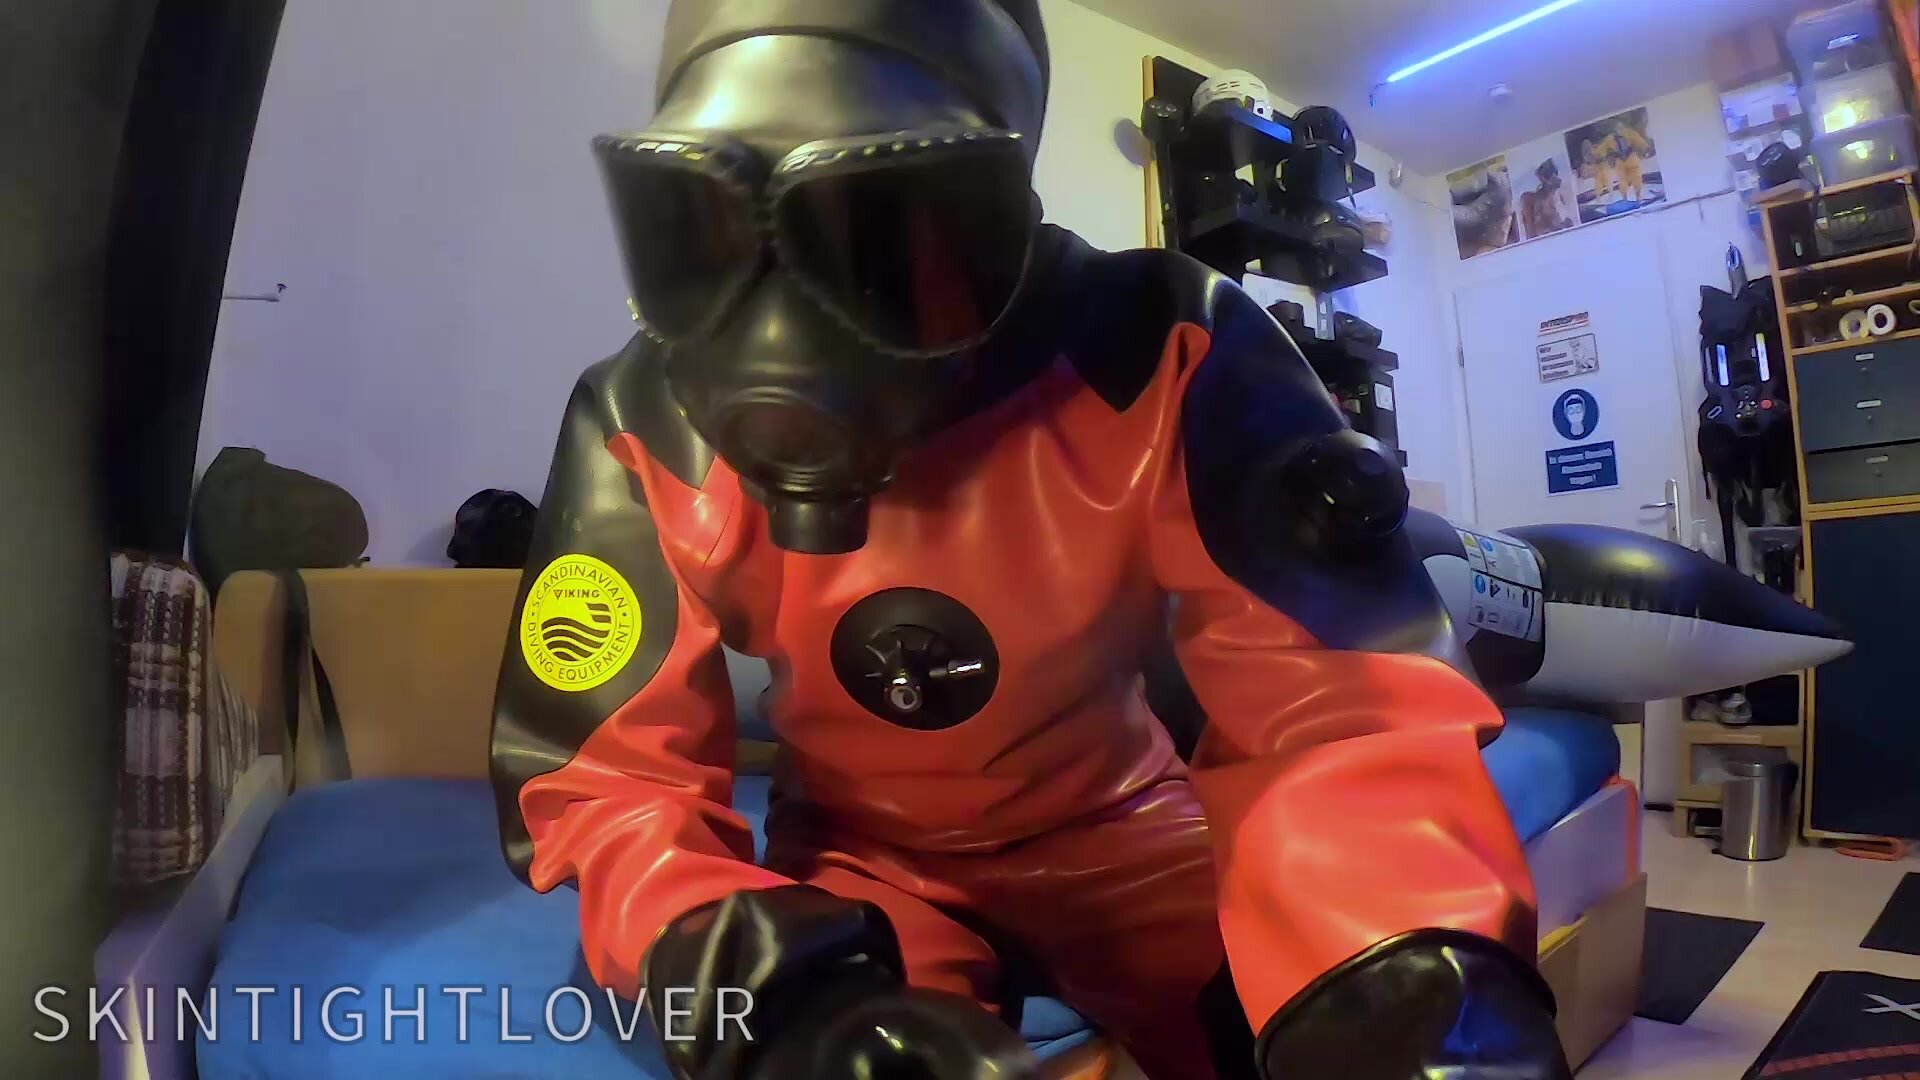 Rubber fun: RIding inflatable in drysuit